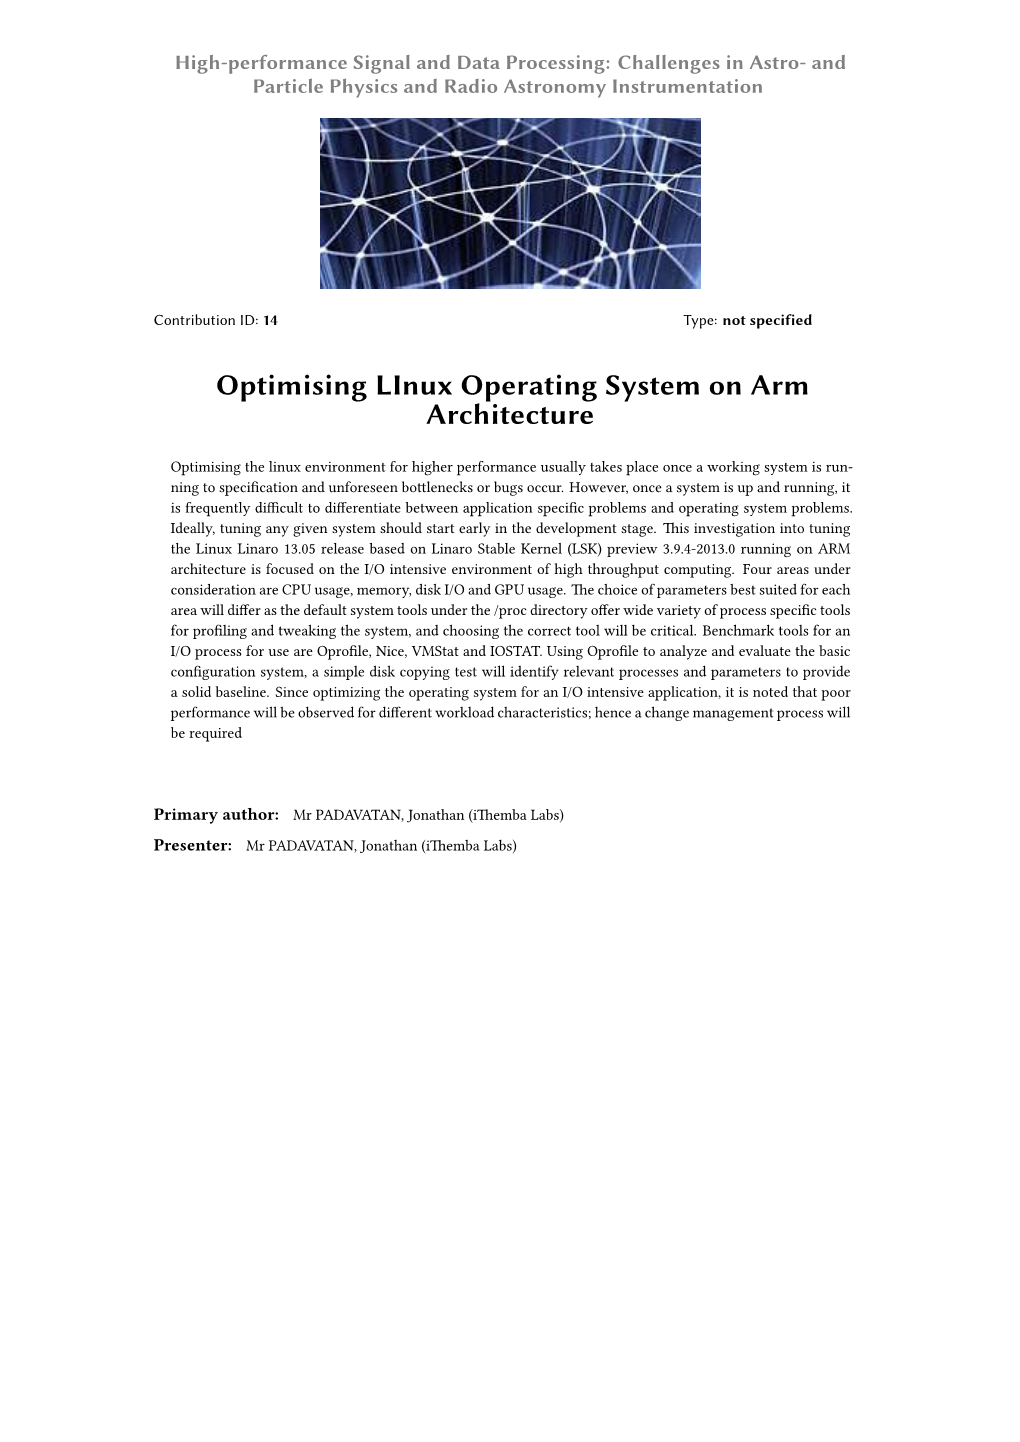 Optimising Linux Operating System on Arm Architecture